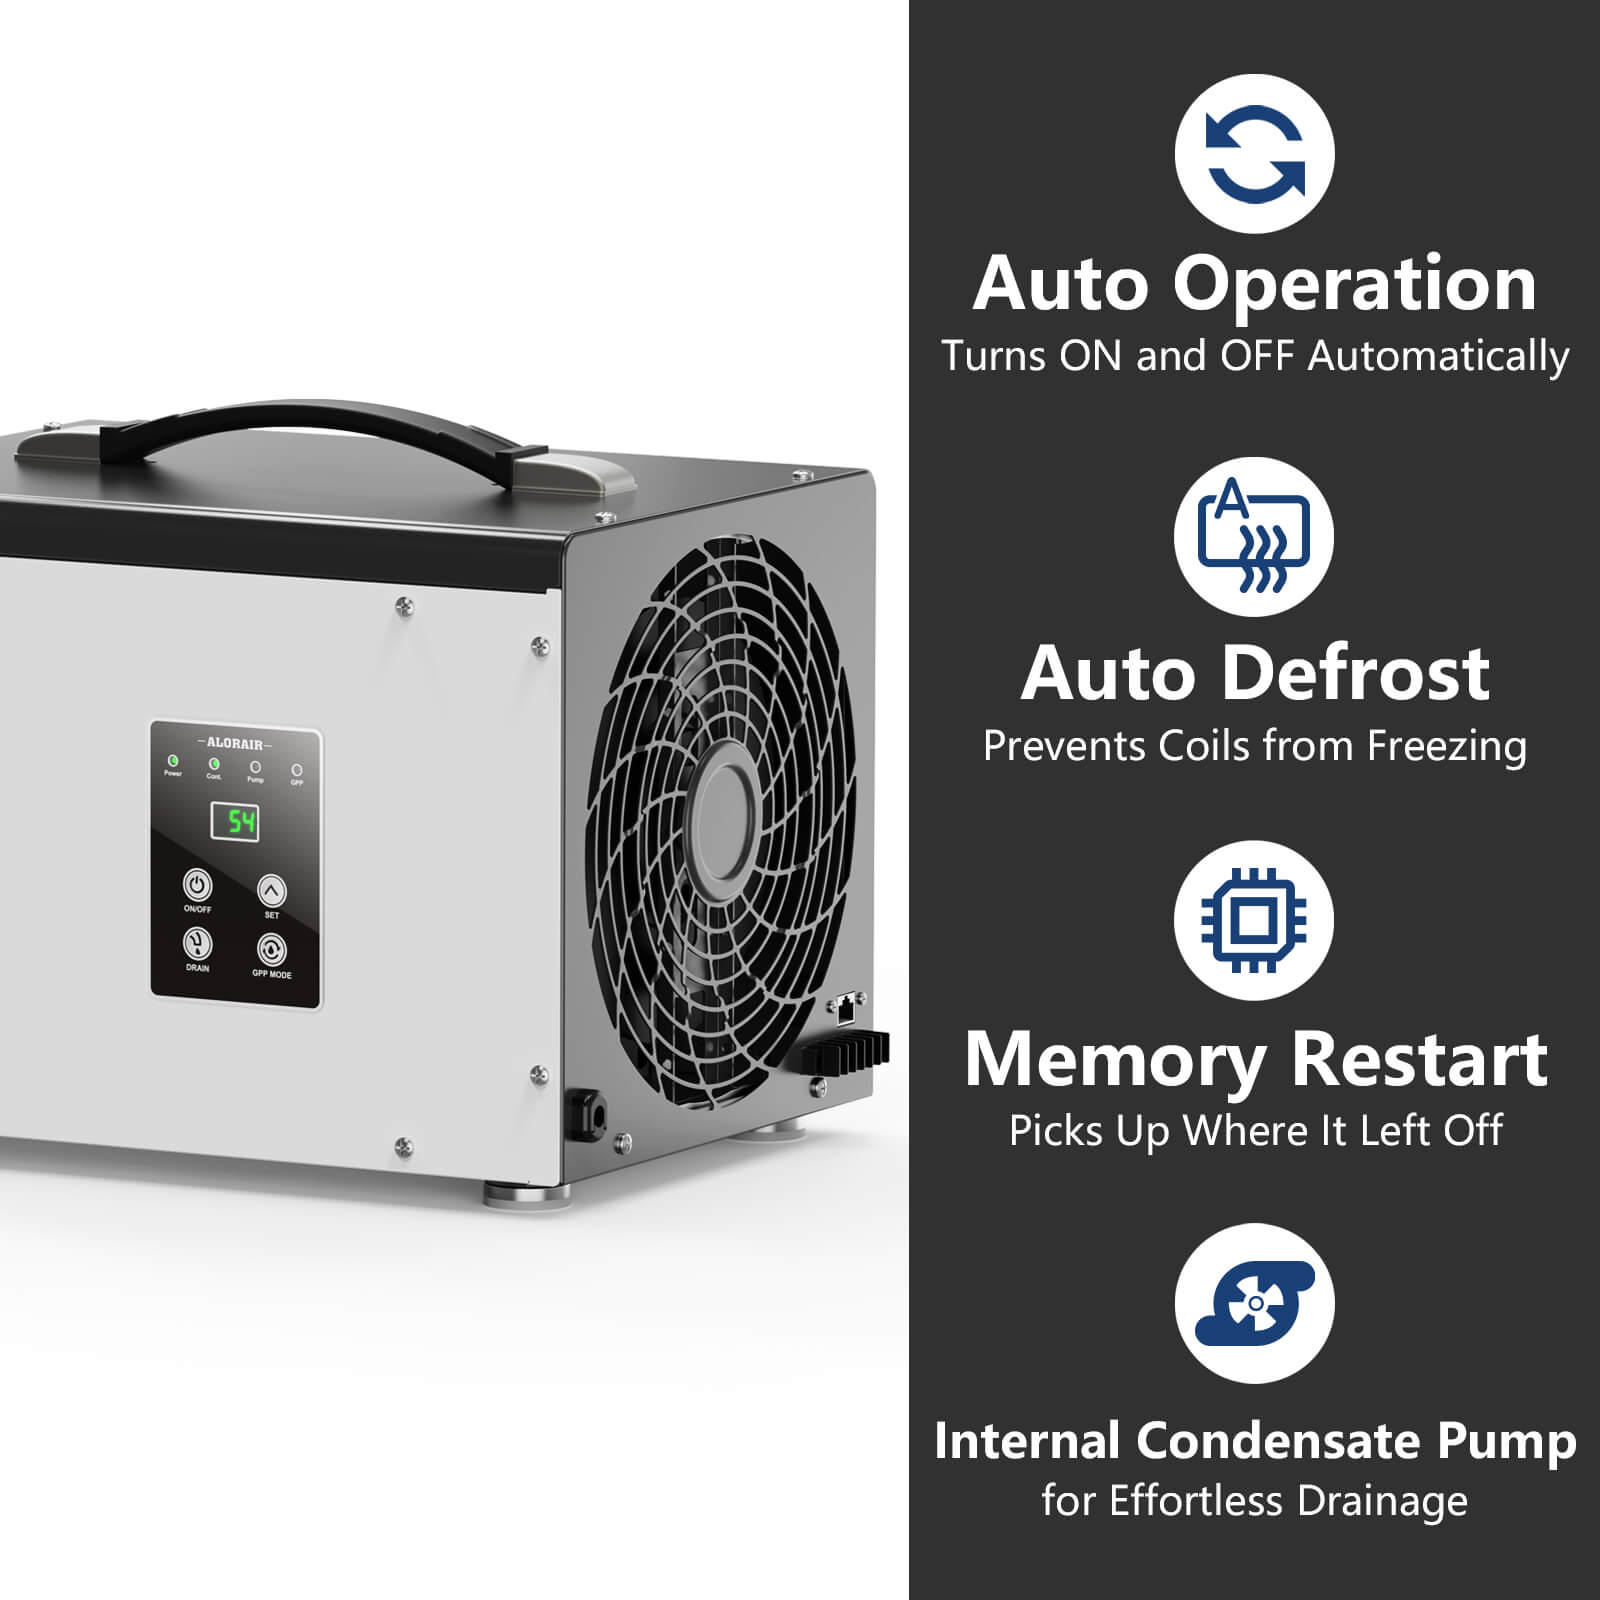 AlorAir Sentinel HD35P 70 Pint Crawl Space Dehumidifier with Drain Hose, Automatic Defrost, Up to 1000 Sq. Ft. Commercial Dehumidifier w/ Energy Star Certified, ETL Listed, GLGR Technology, 5 Year Warranty AlorAir